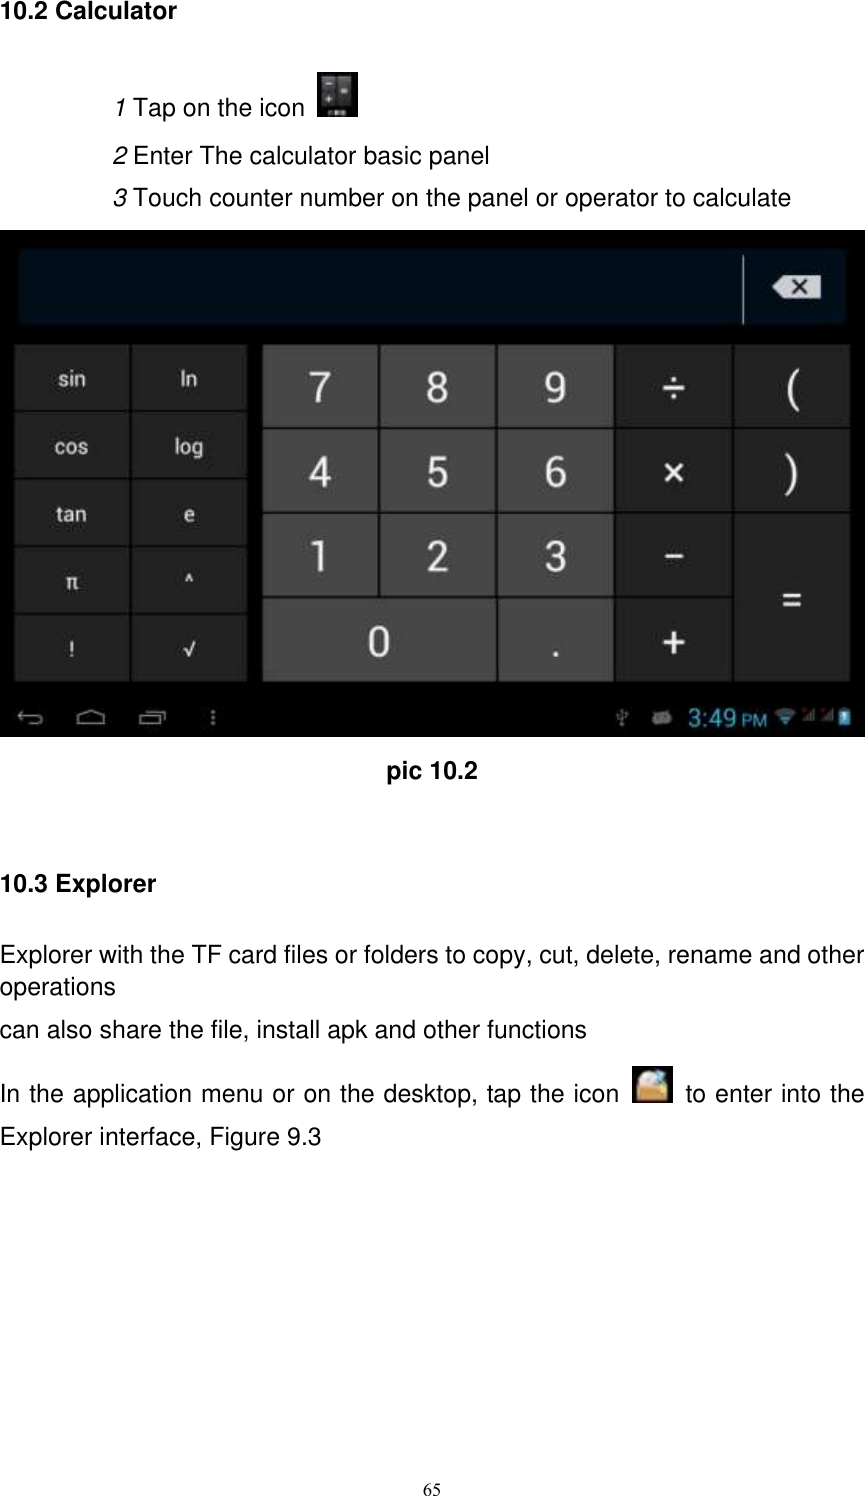      65 10.2 Calculator 1 Tap on the icon   2 Enter The calculator basic panel   3 Touch counter number on the panel or operator to calculate  pic 10.2  10.3 Explorer Explorer with the TF card files or folders to copy, cut, delete, rename and other operations can also share the file, install apk and other functions In the application menu or on the desktop, tap the icon    to enter into the Explorer interface, Figure 9.3  